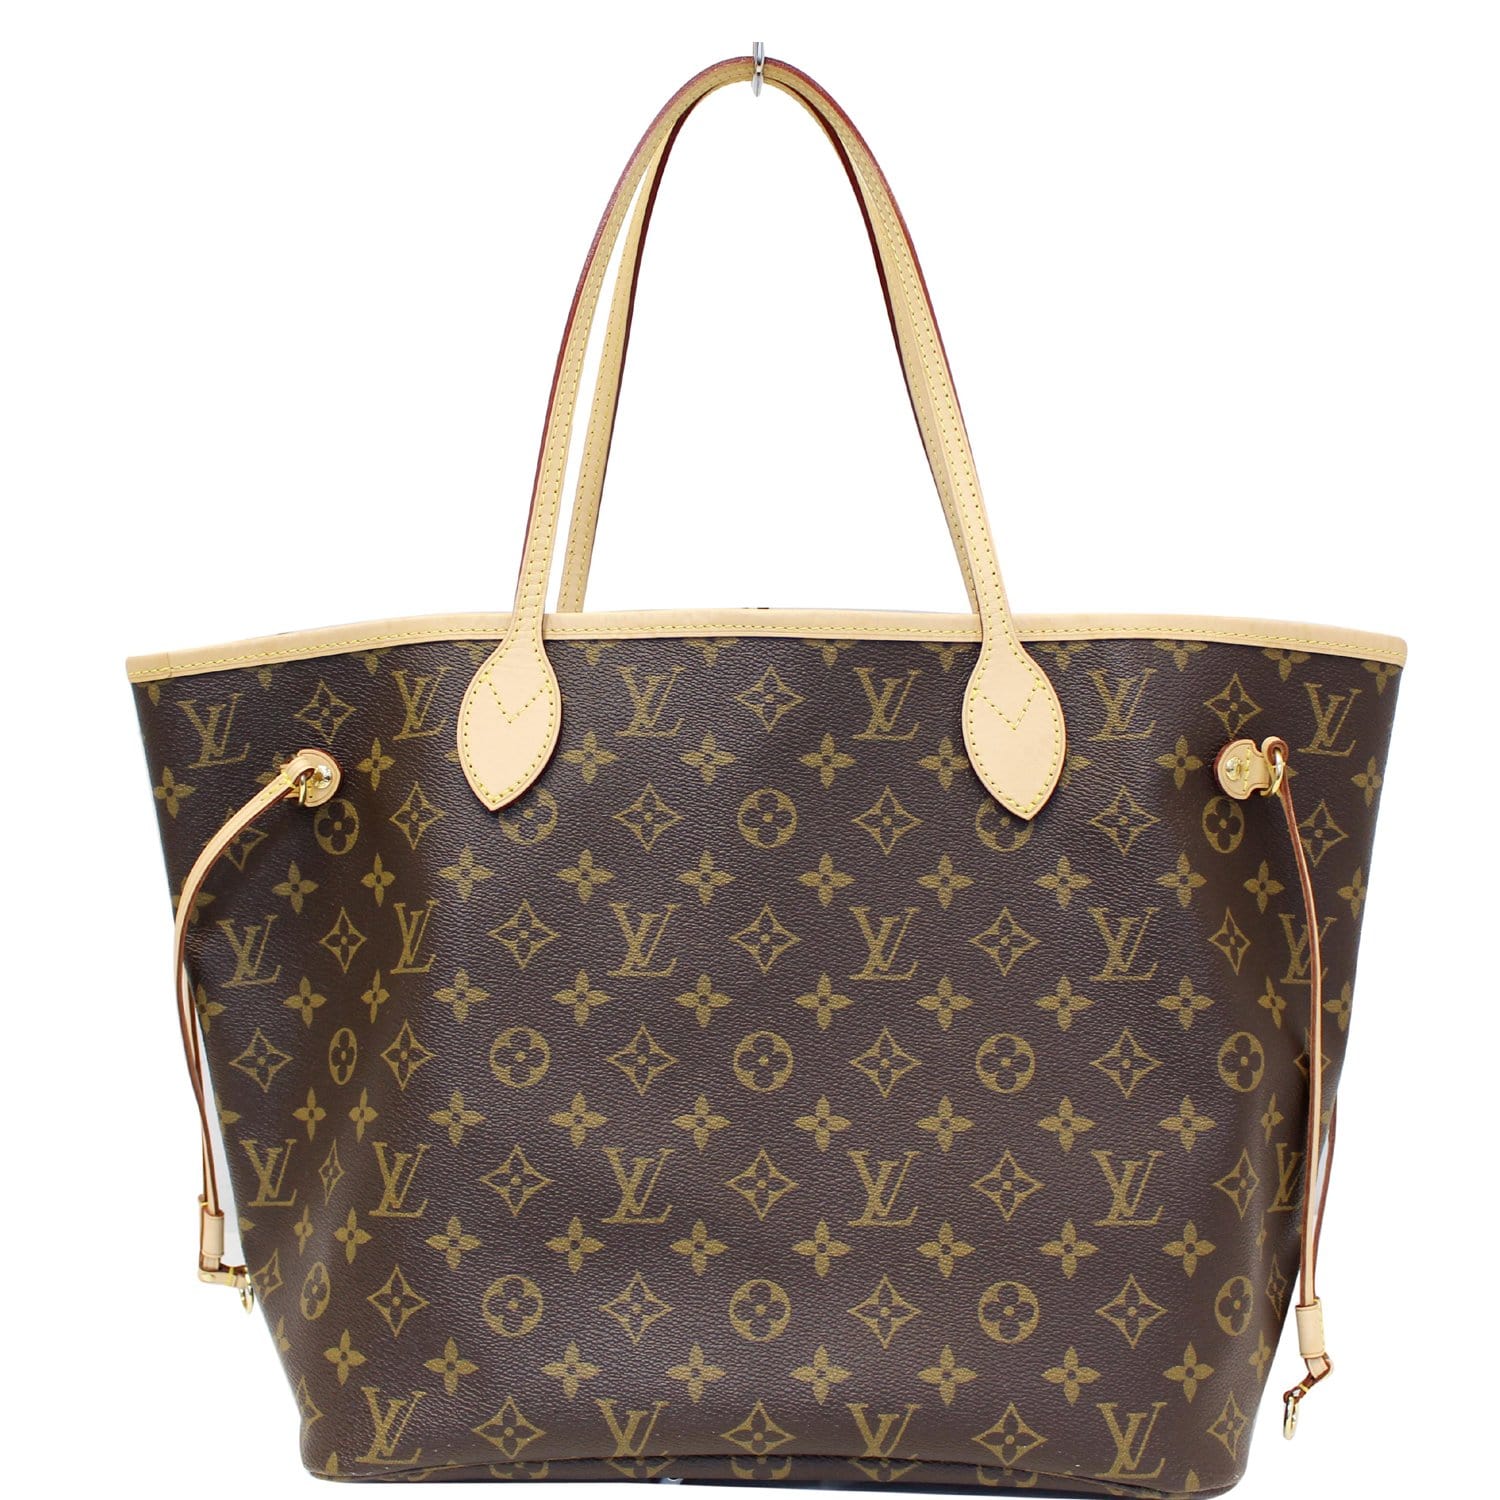 100% ORIGINAL PREOWNED LOUIS VUITTON Neverfull GM monogram with box dustbag  wristlet.DM For Further Info.